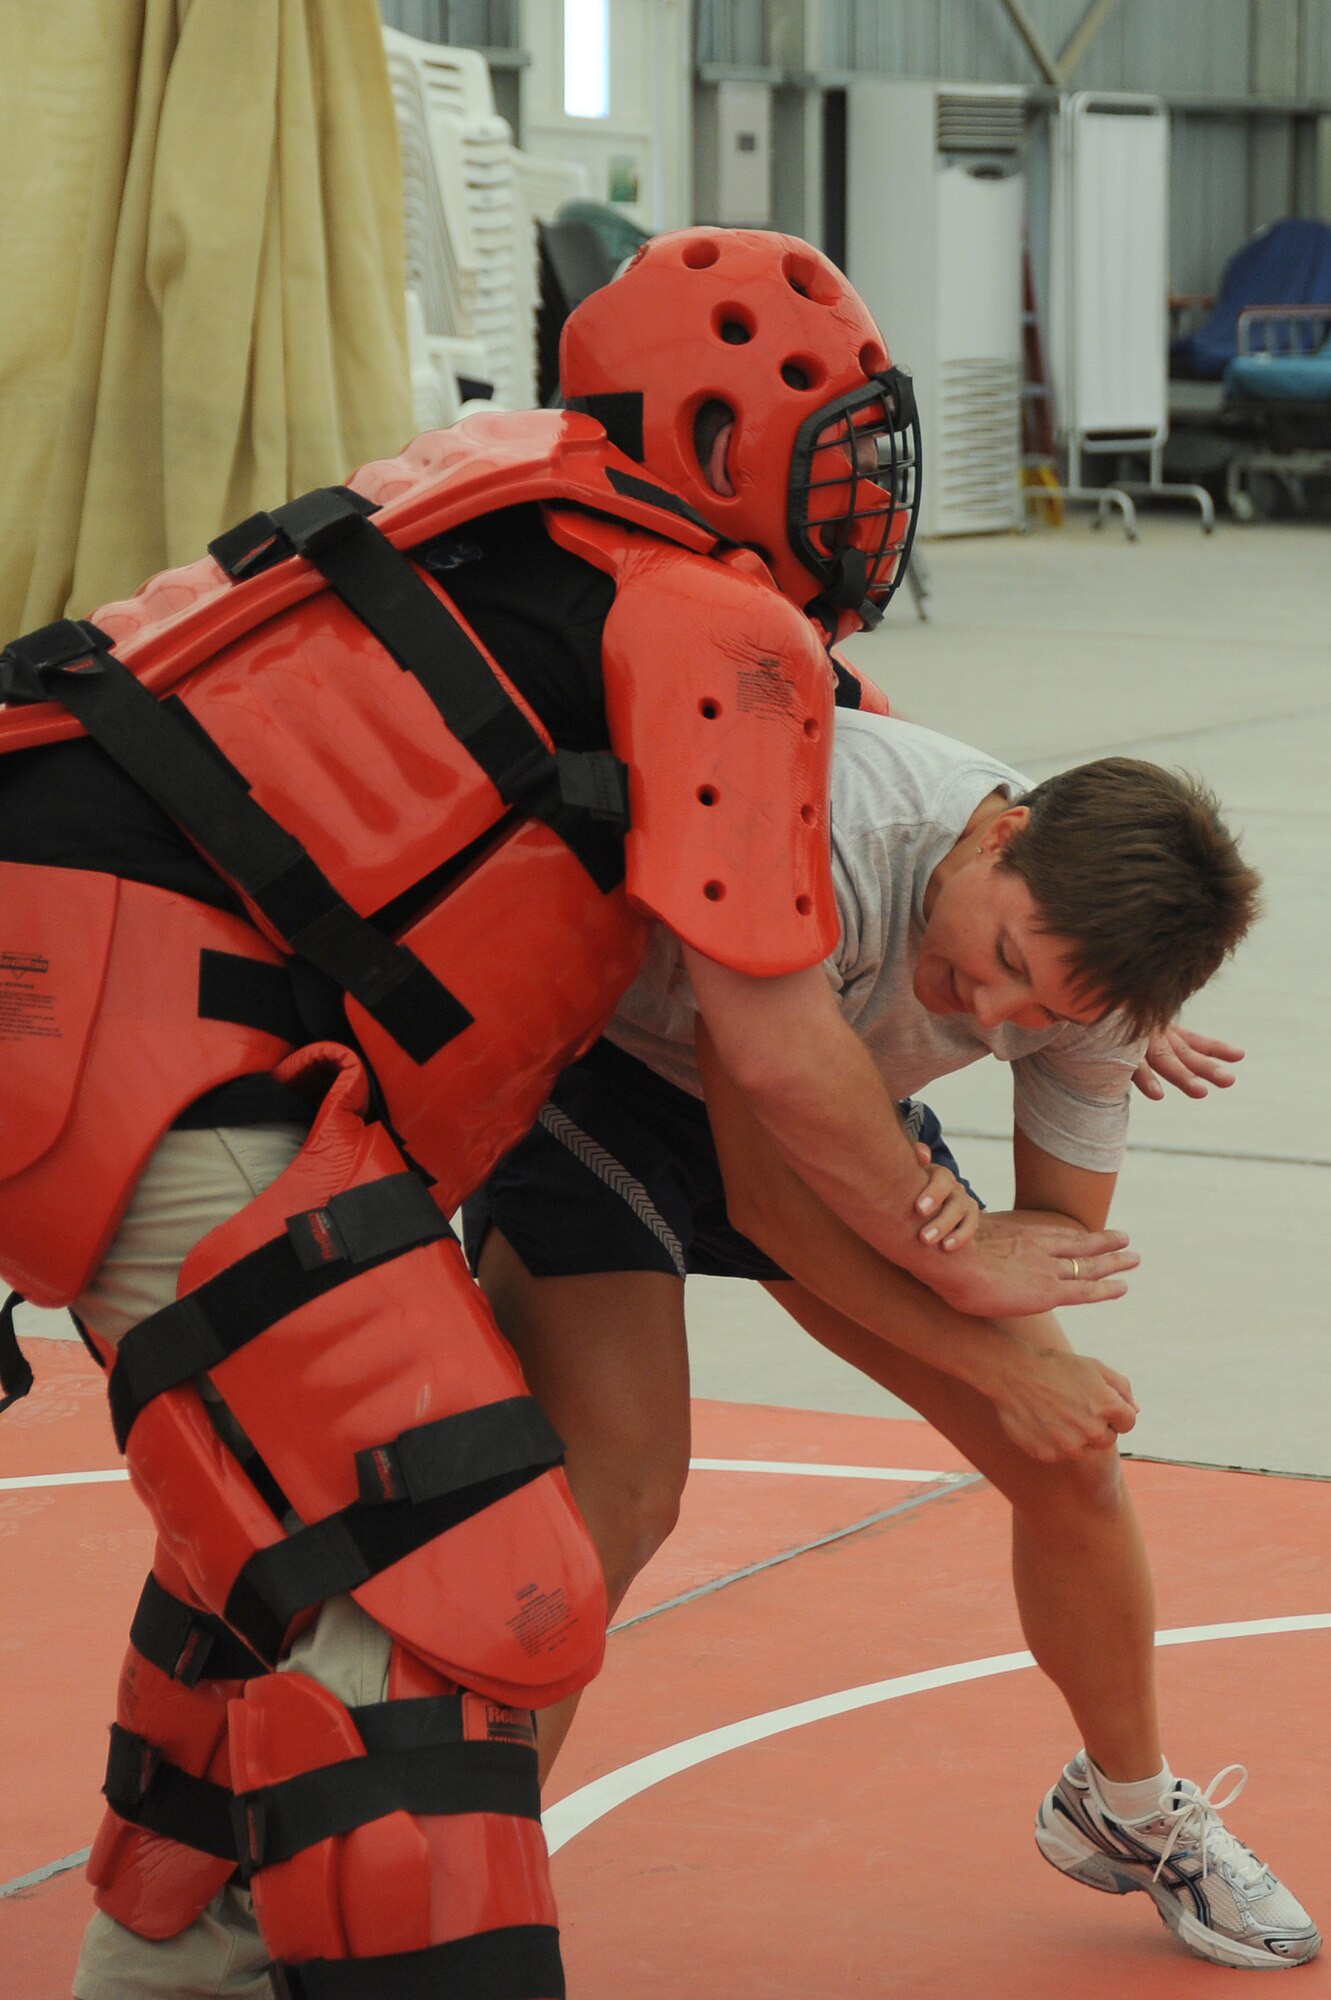 Master Sgt. Malinda Kingsley, 380th Expeditionary Maintenance Squadron, fights off an attacker played by Mr. Rick Baldwin, a Northrop Grumman contractor during self-defense training, April 18 at an undisclosed location in Southwest Asia. The Sexual Assault Response Coordinator (SARC) sponsored the training that gave students the chance to learn techniques to defend themselves from attack. Sergeant Kingley is deployed from Grand Forks AFB, N.D. and hails from Morgan, Minn. (U.S. Air Force photo by Senior Airman Brian J. Ellis) (Released)